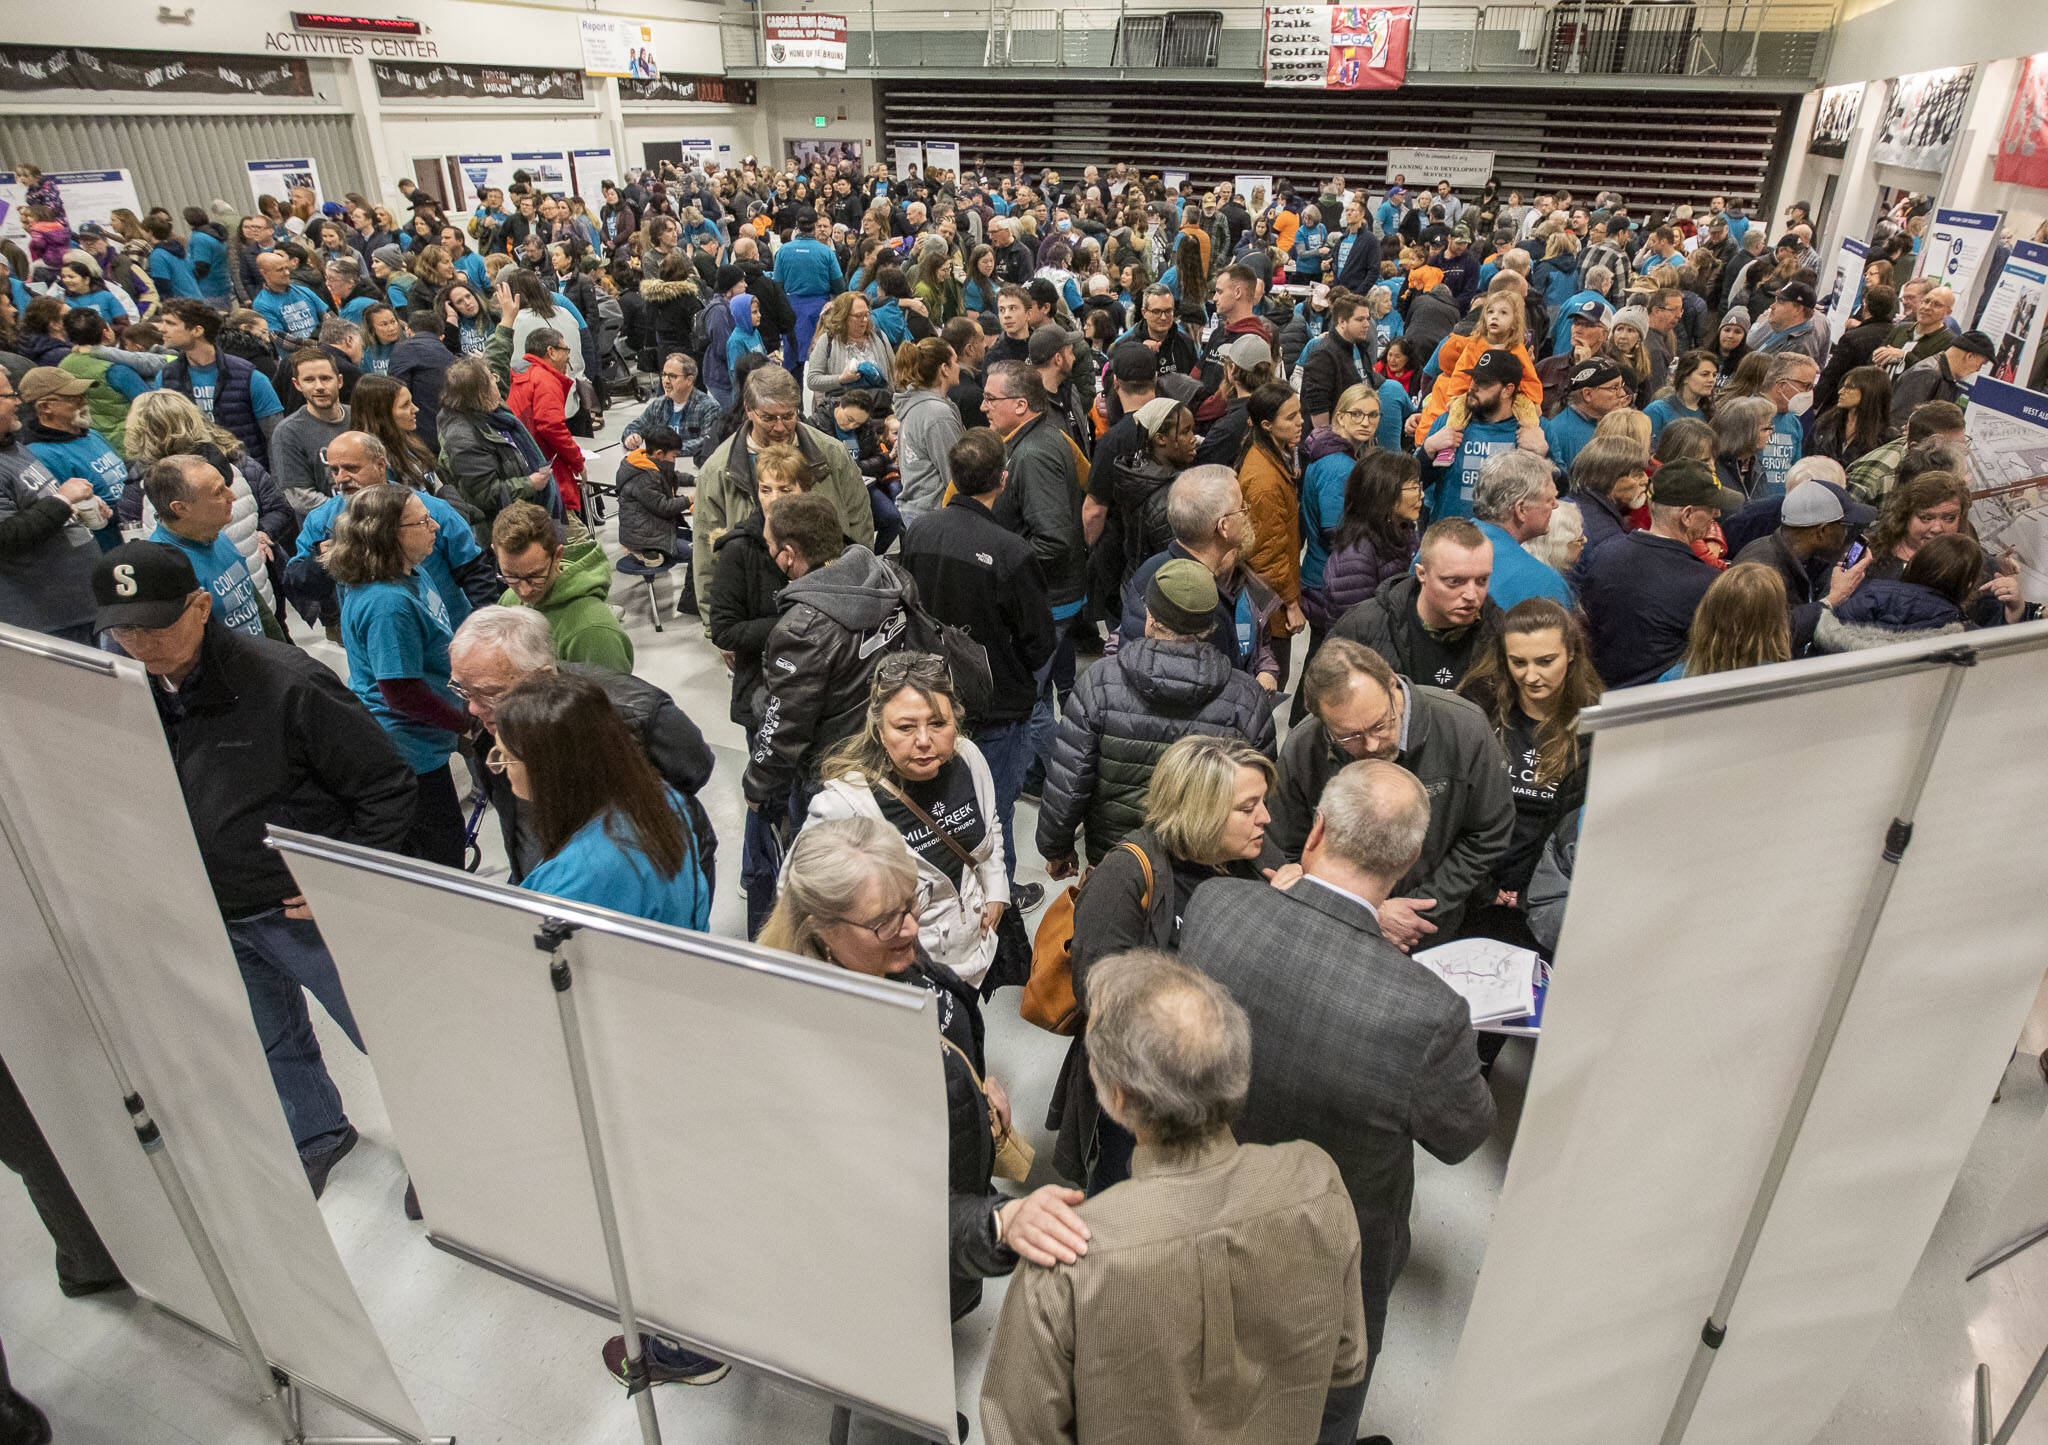 Hundreds of Alderwood Community Church and Mill Creek Foursquare Church leaders and members fill Cascade High School’s lunchroom during Sound Transit’s in-person open house on Wednesday, Feb. 15, 2023 in Everett, Washington. (Olivia Vanni / The Herald)